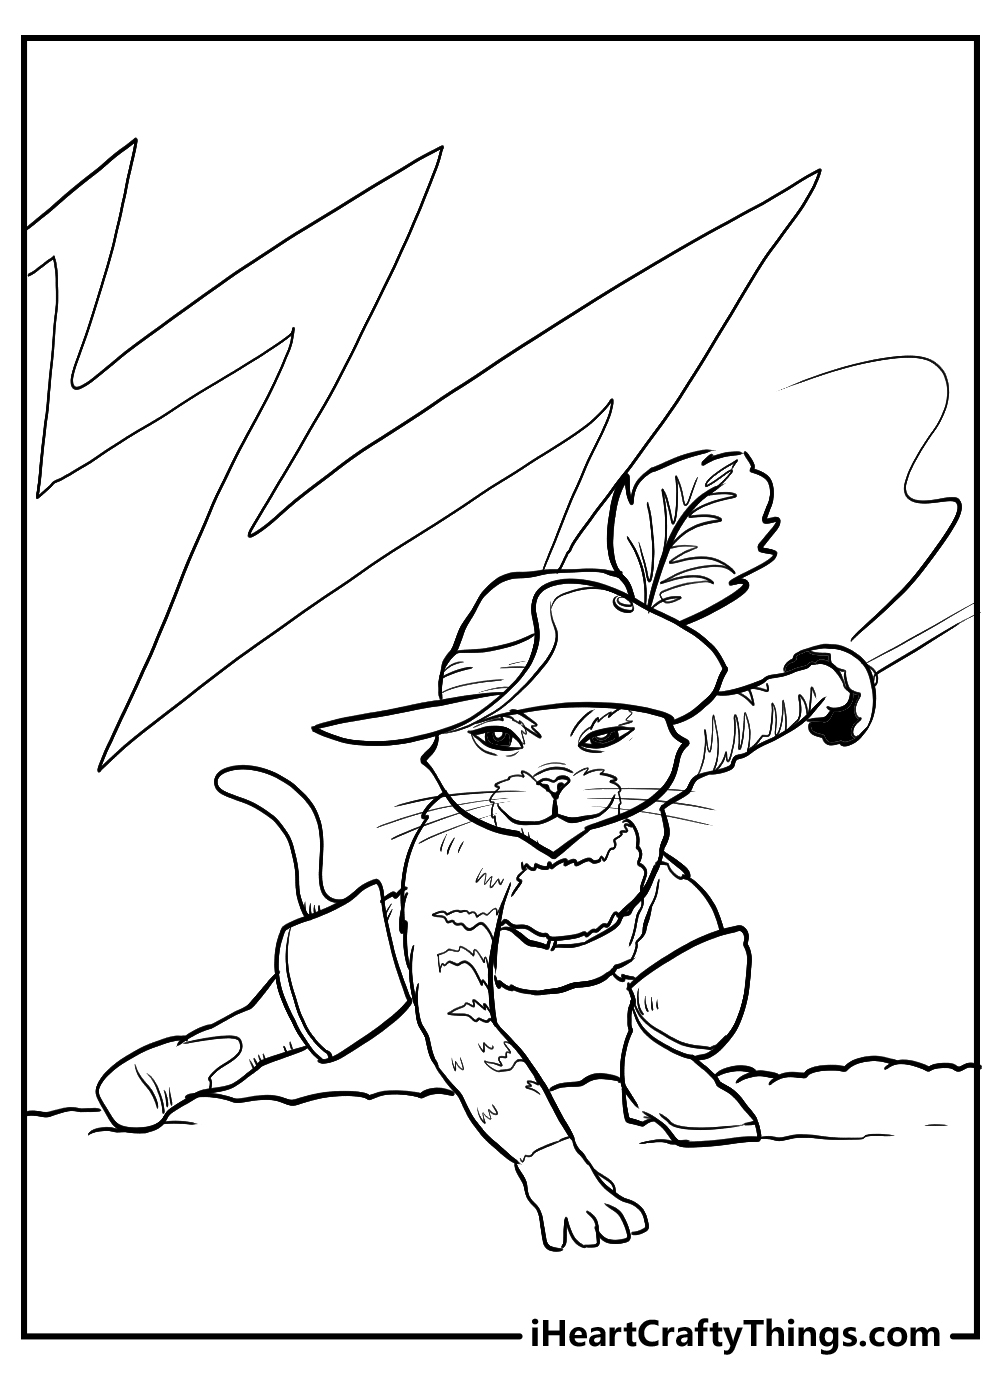 puss in boots coloring sheet for adults